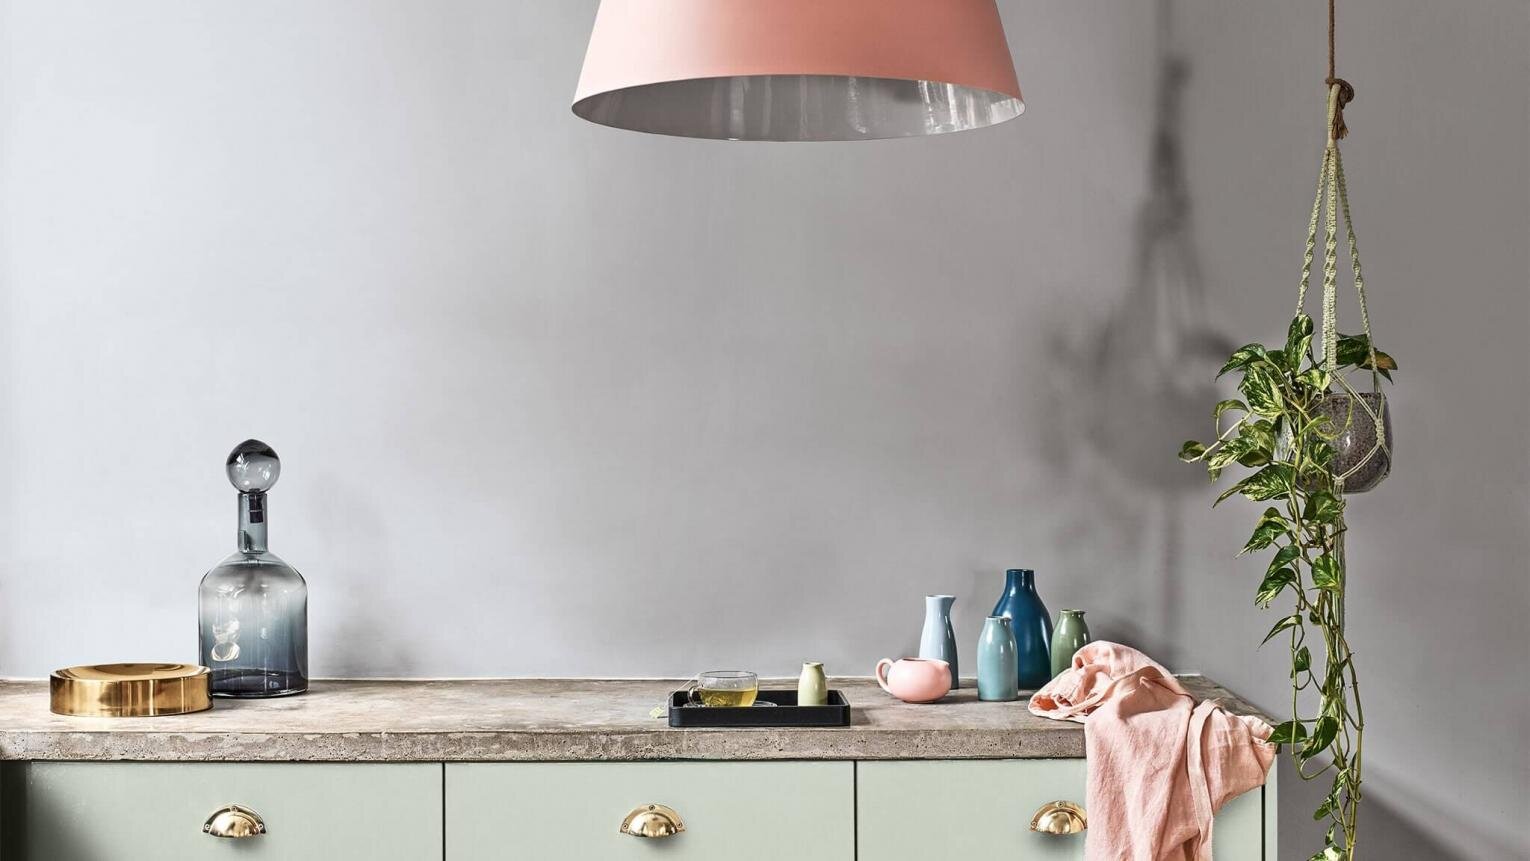 dulux-colour-futures-colour-of-the-year-2020-a-home-for-care-kitchen-inspiration-united-kingdom-6.jpg